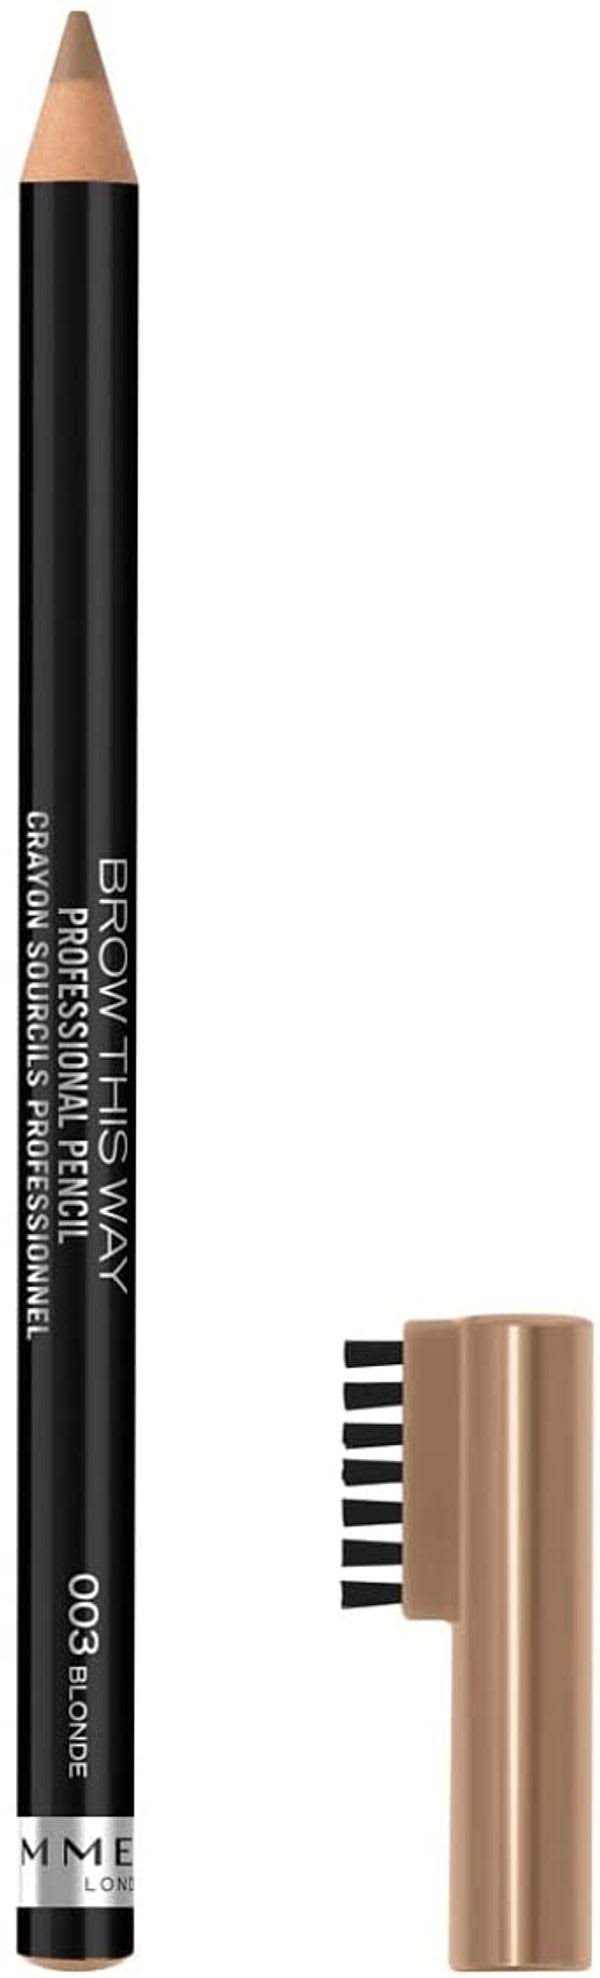 Rimmel Brow This Way Professional Brow Pencil - 003 Blonde